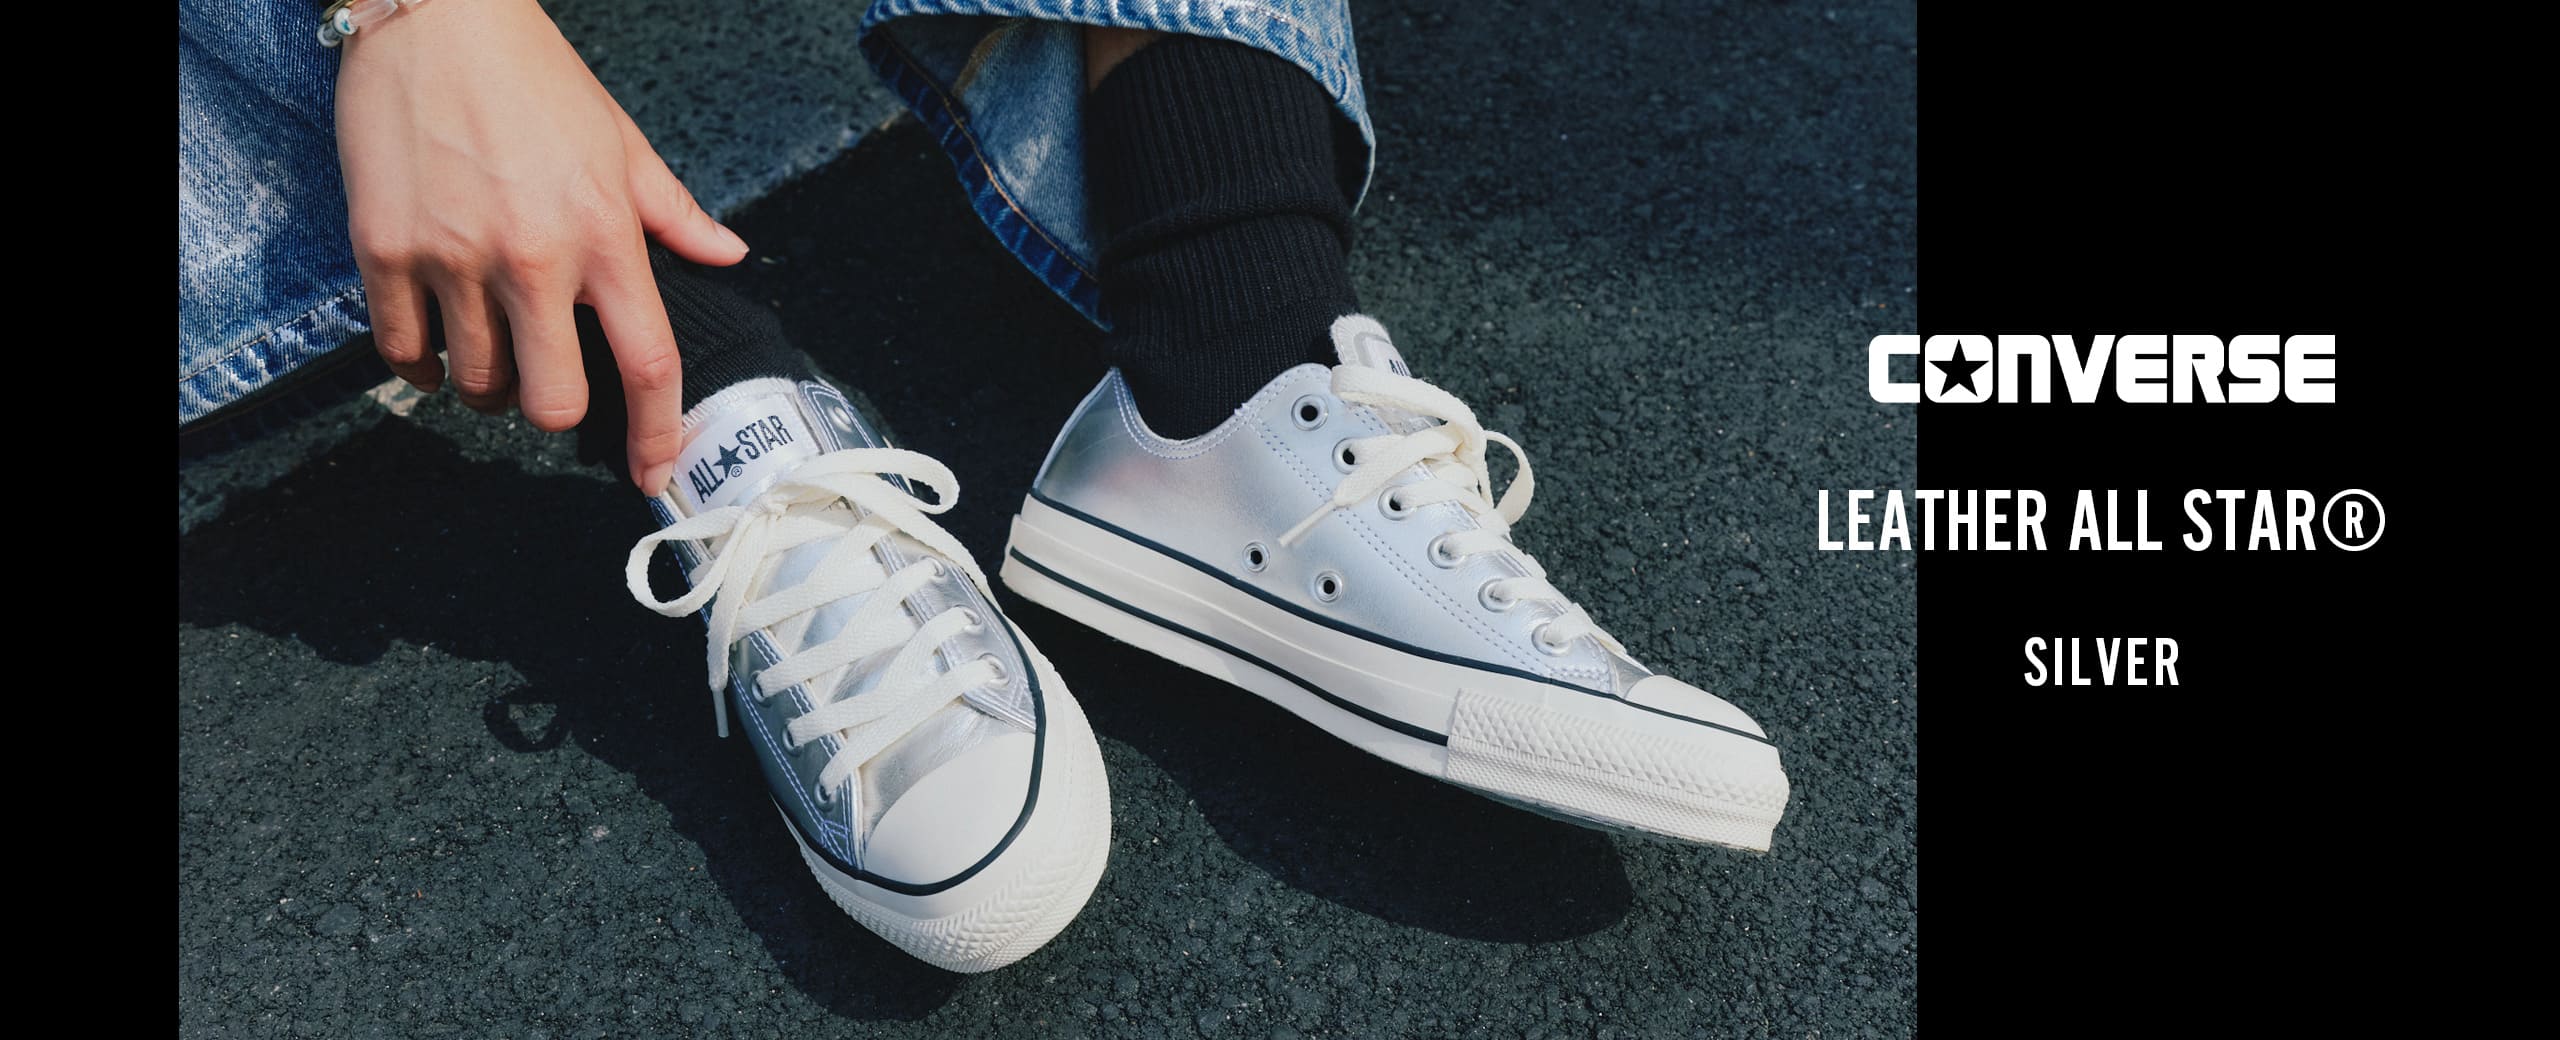 "CONVERSE LEATHER ALL STAR®  SILVER"